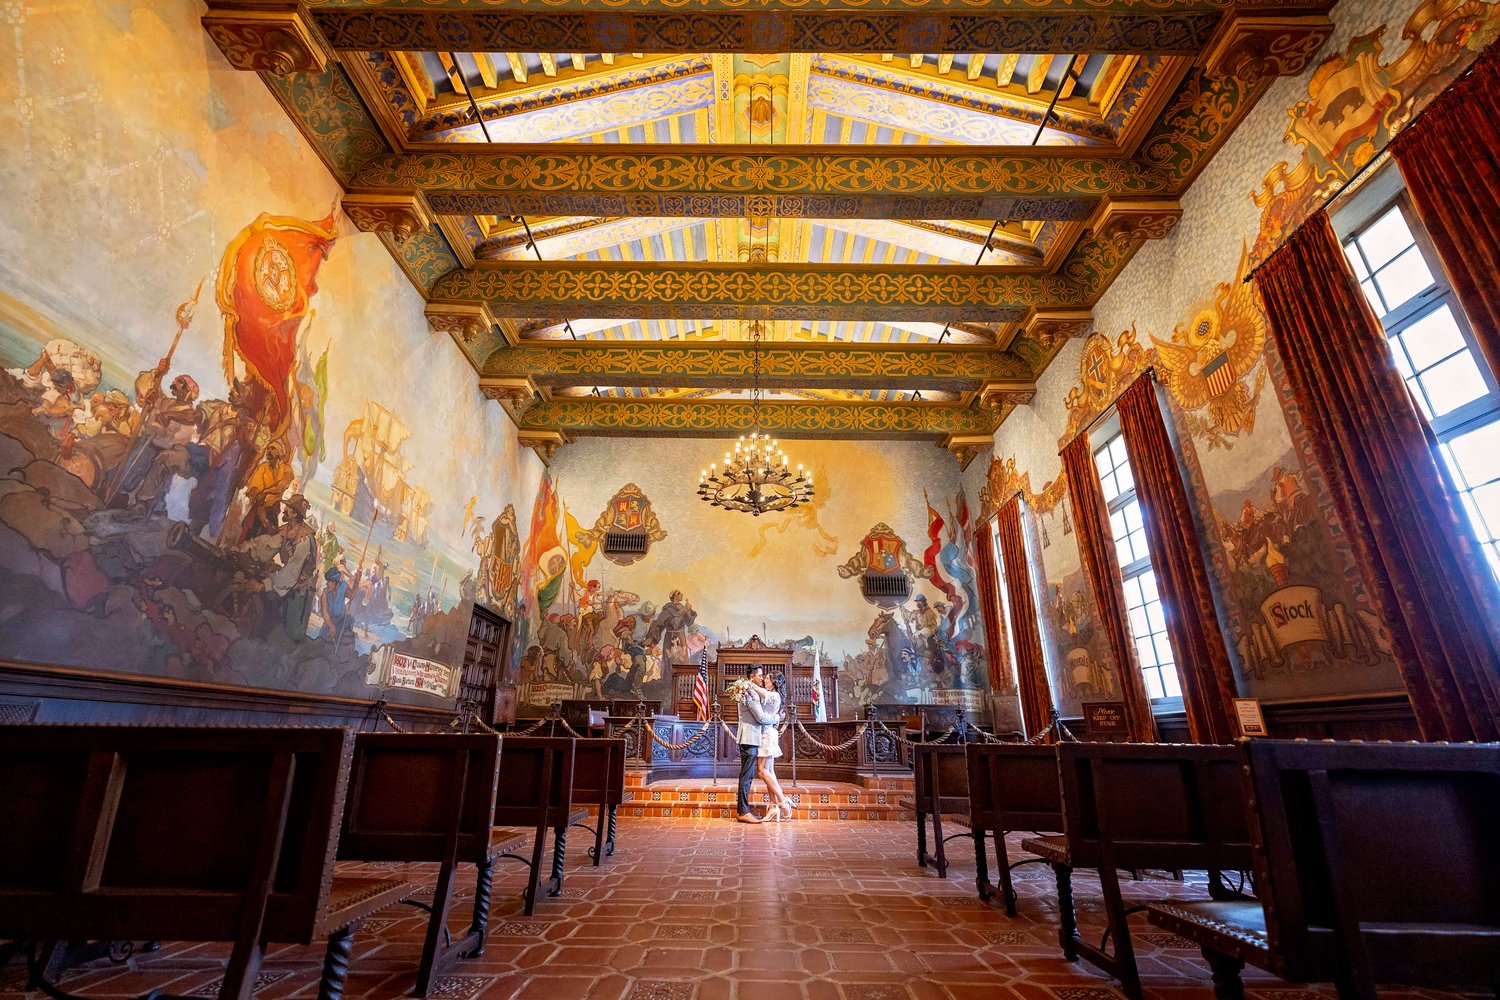 Bride and groom embrace at the front of the mural room at the Santa Barbara Courthouse